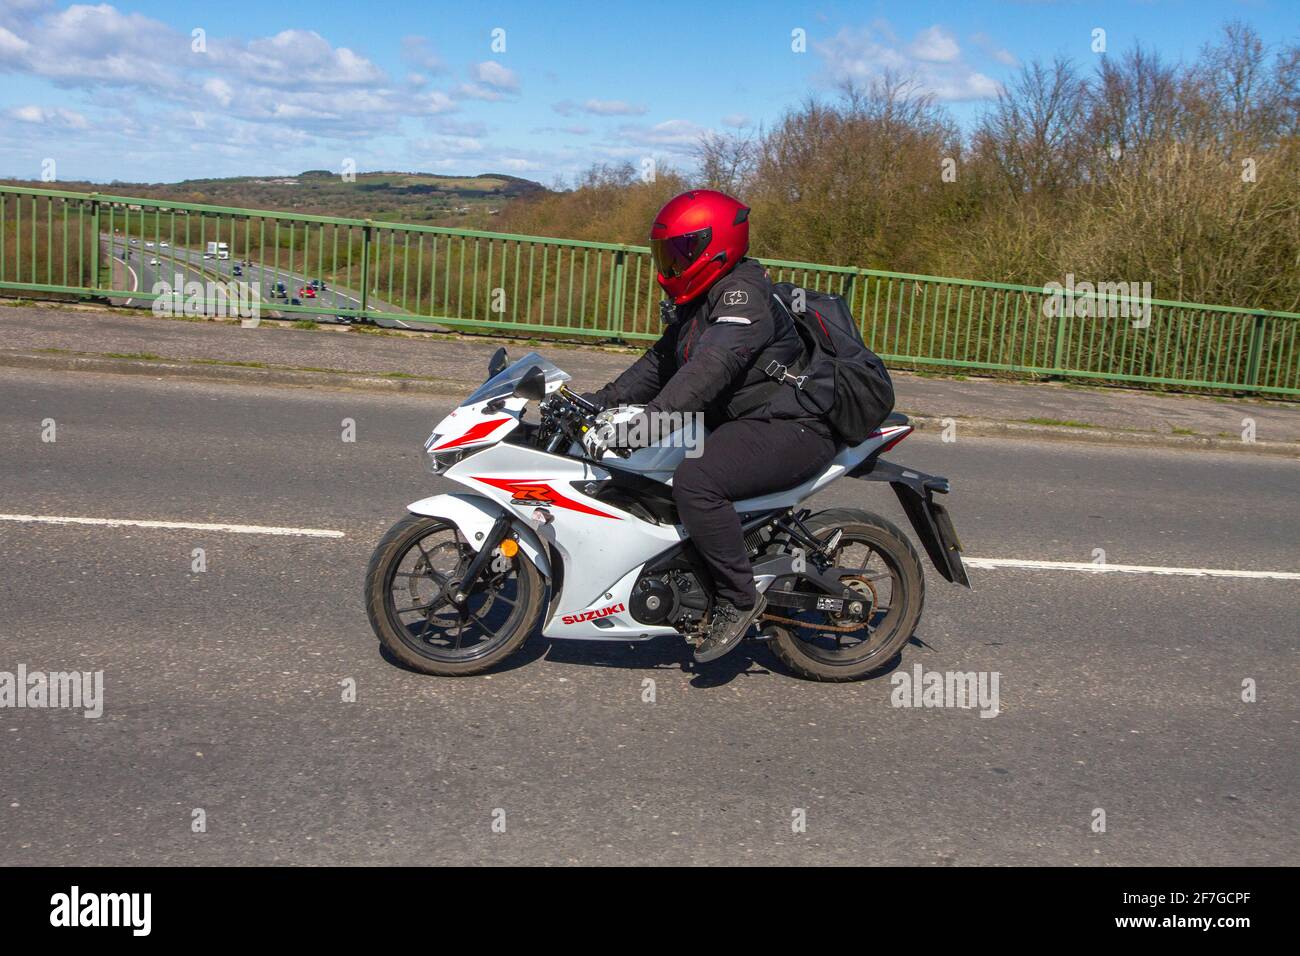 2020 Suzuki Gsxr 125 Ai8 125cc roadster; Motorbike rider; two wheeled transport, motorcycles, vehicle on British roads, motorbikes, motorcycle bike riders motoring in Manchester, UK Stock Photo